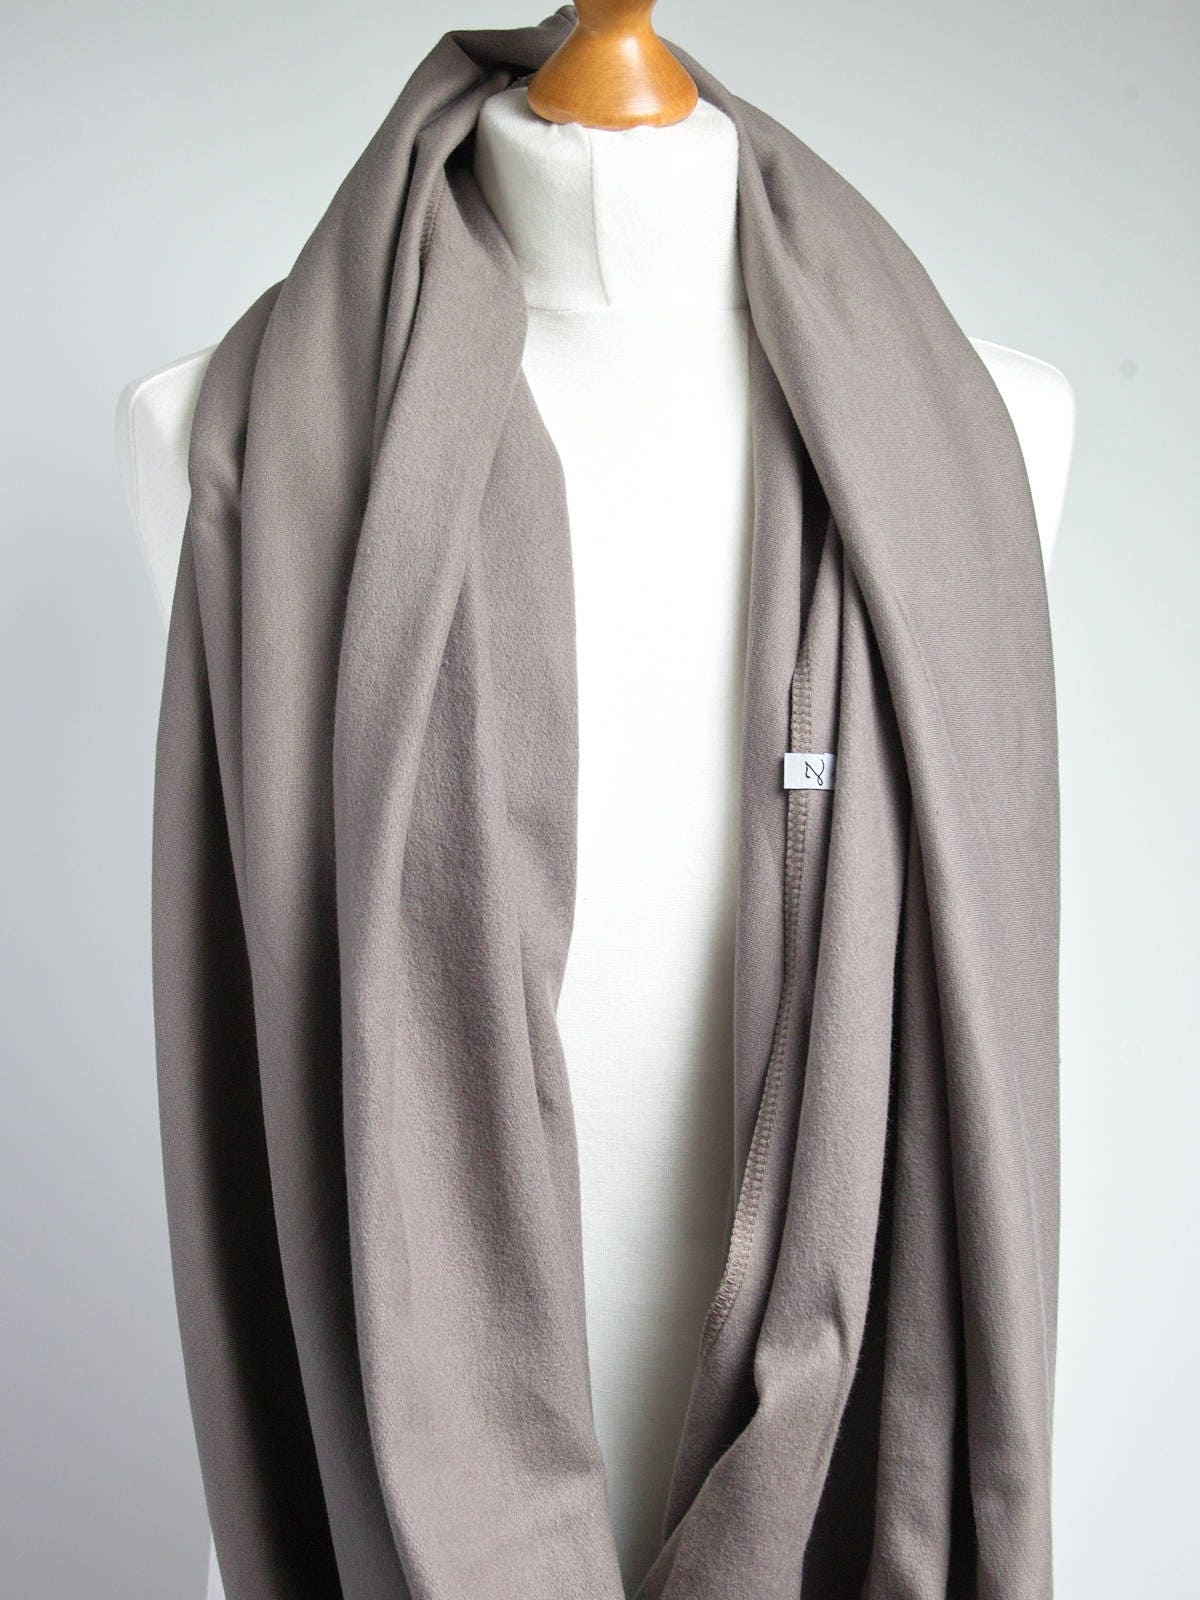 JERSEY infinity scarf in TAUPE colour , infinity scarves by ZOJANKA ...